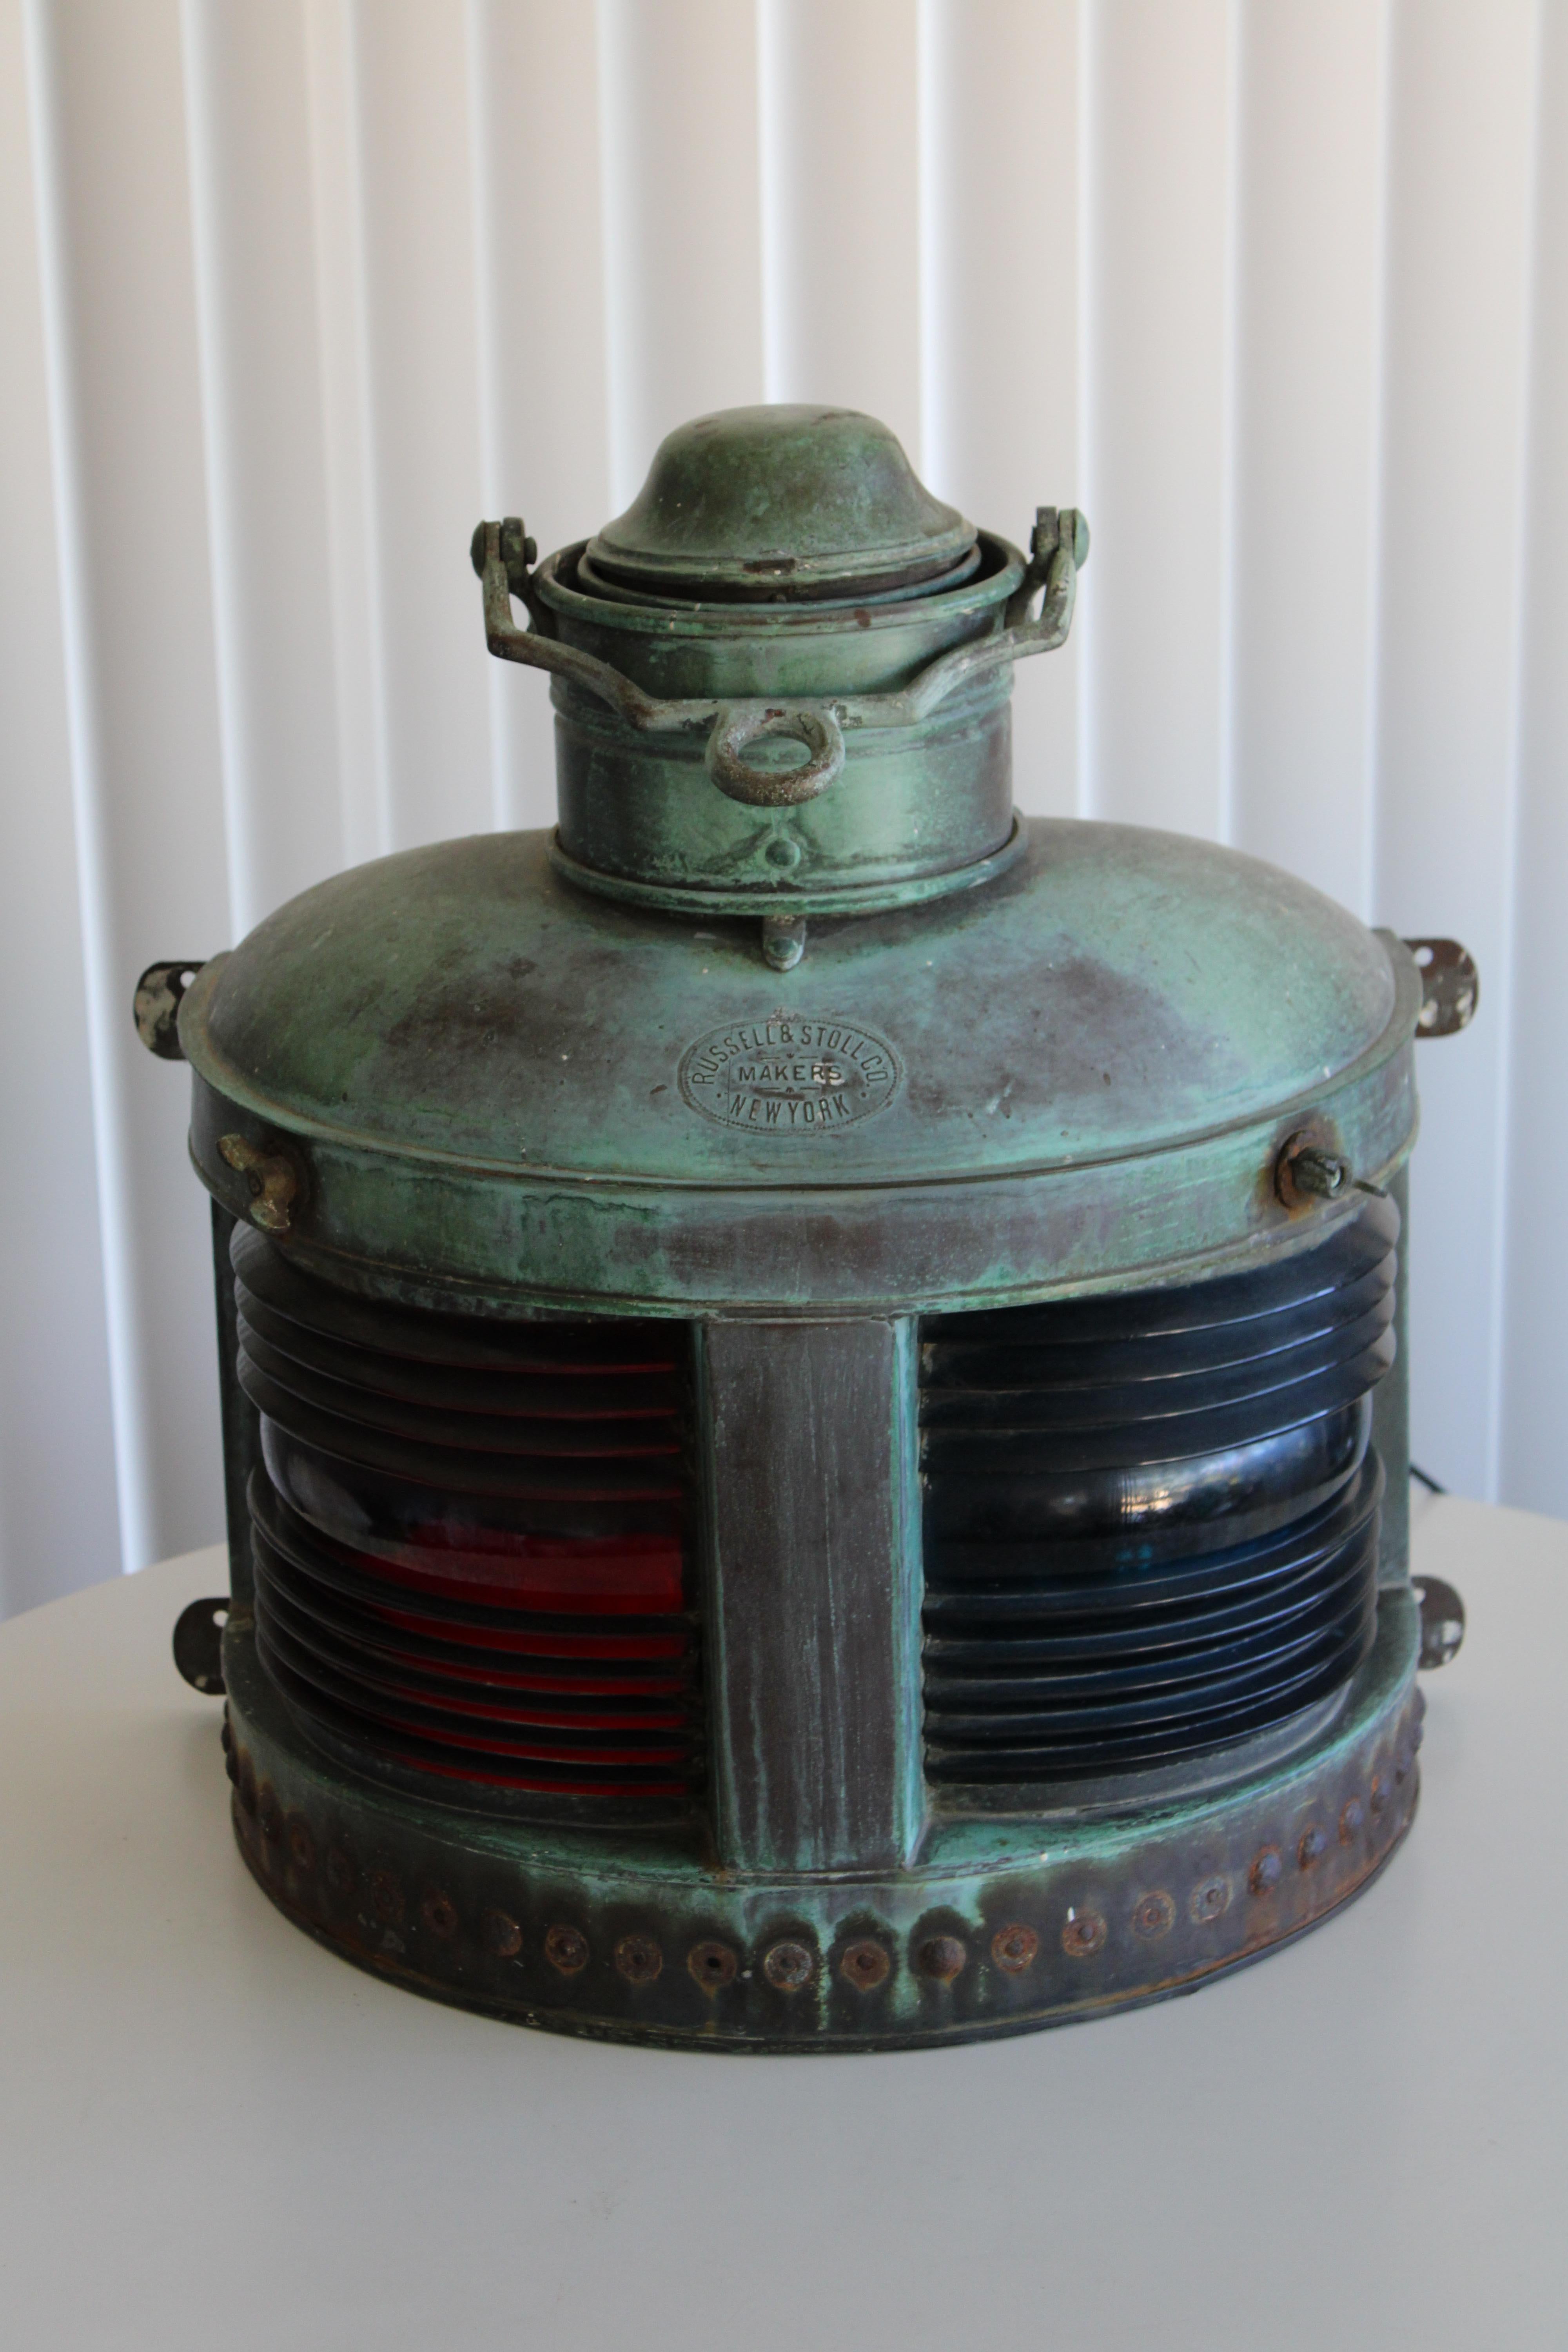 A heavy solid bronze ship's light with thick red and blue-green prism glass lenses. Heavily patinated bronze. 19th century lantern was originally a kerosene lamp. Recently rewired for electrical use. Marked RUSSEL & STOLL MAKERS NEW YORK. Measures